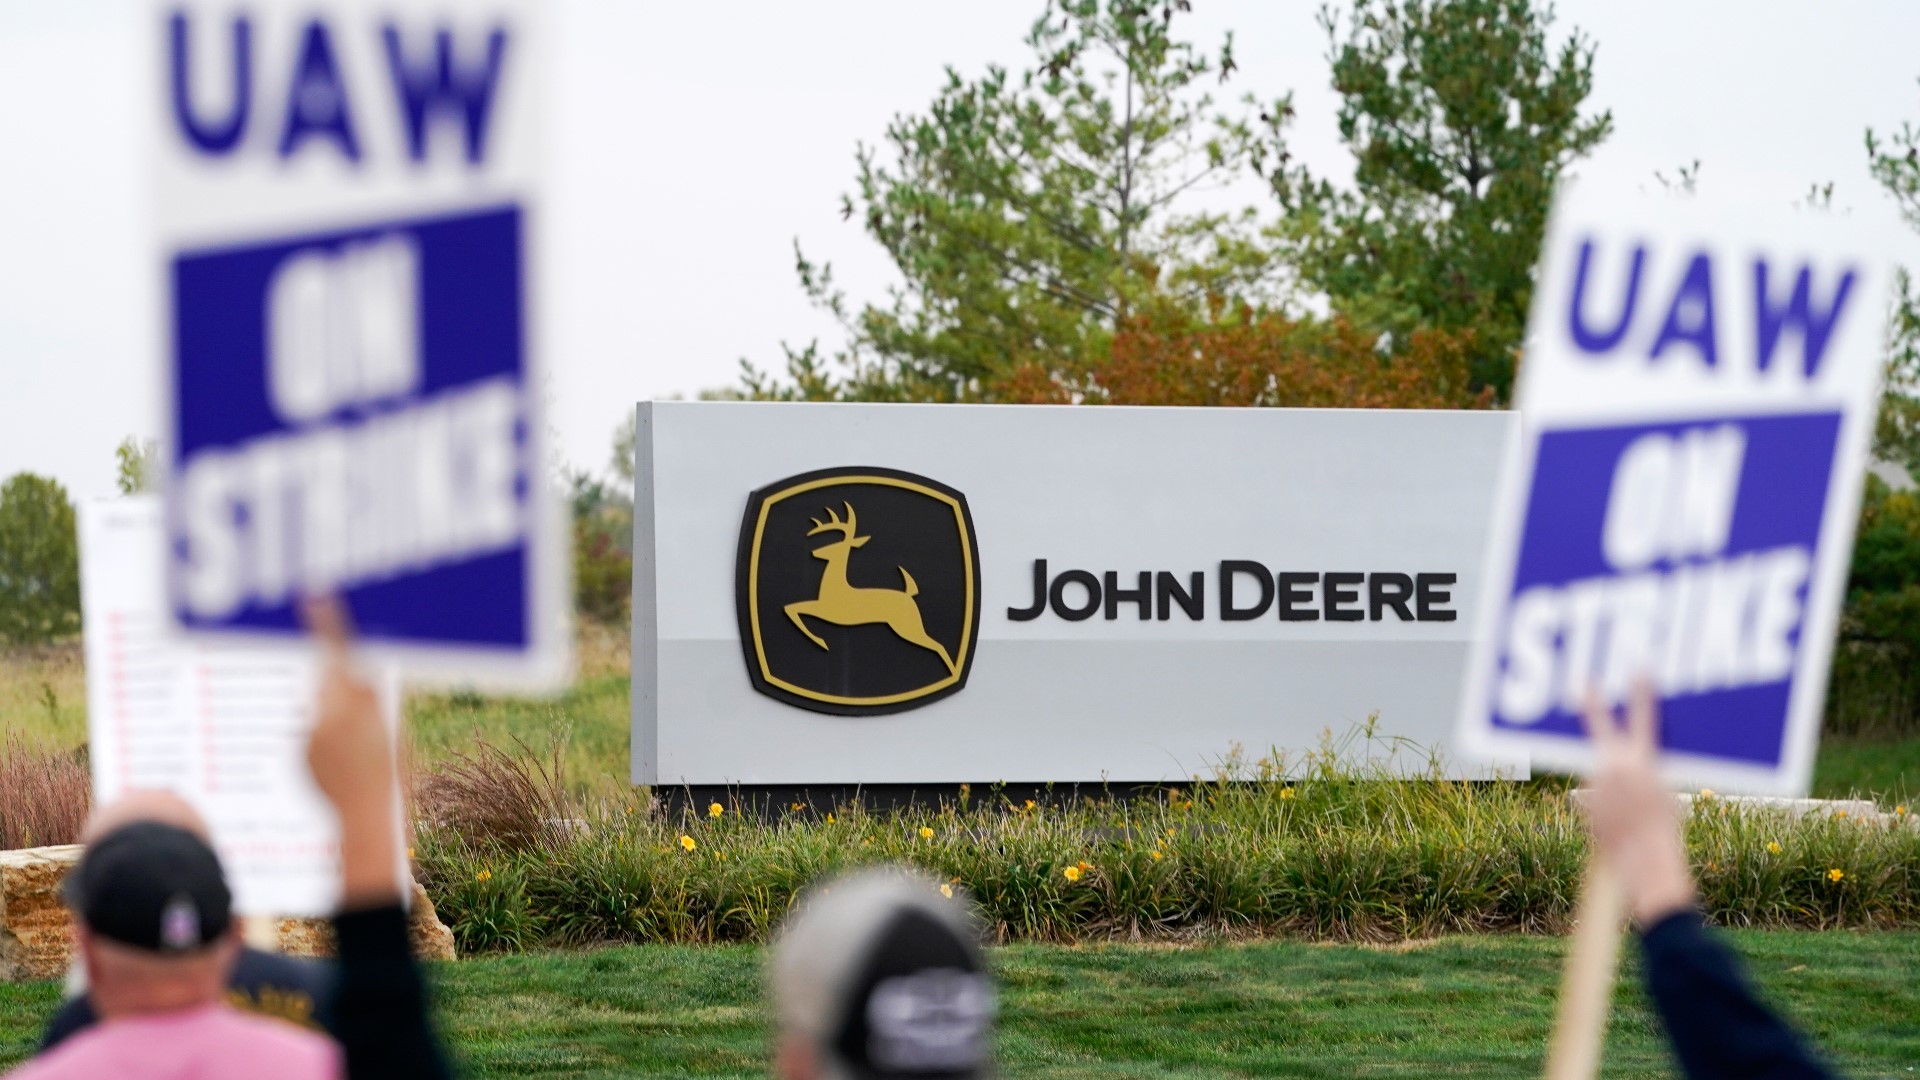 UAW says 45% of John Deere members voted for the proposed contract while 55% voted against it Tuesday night.